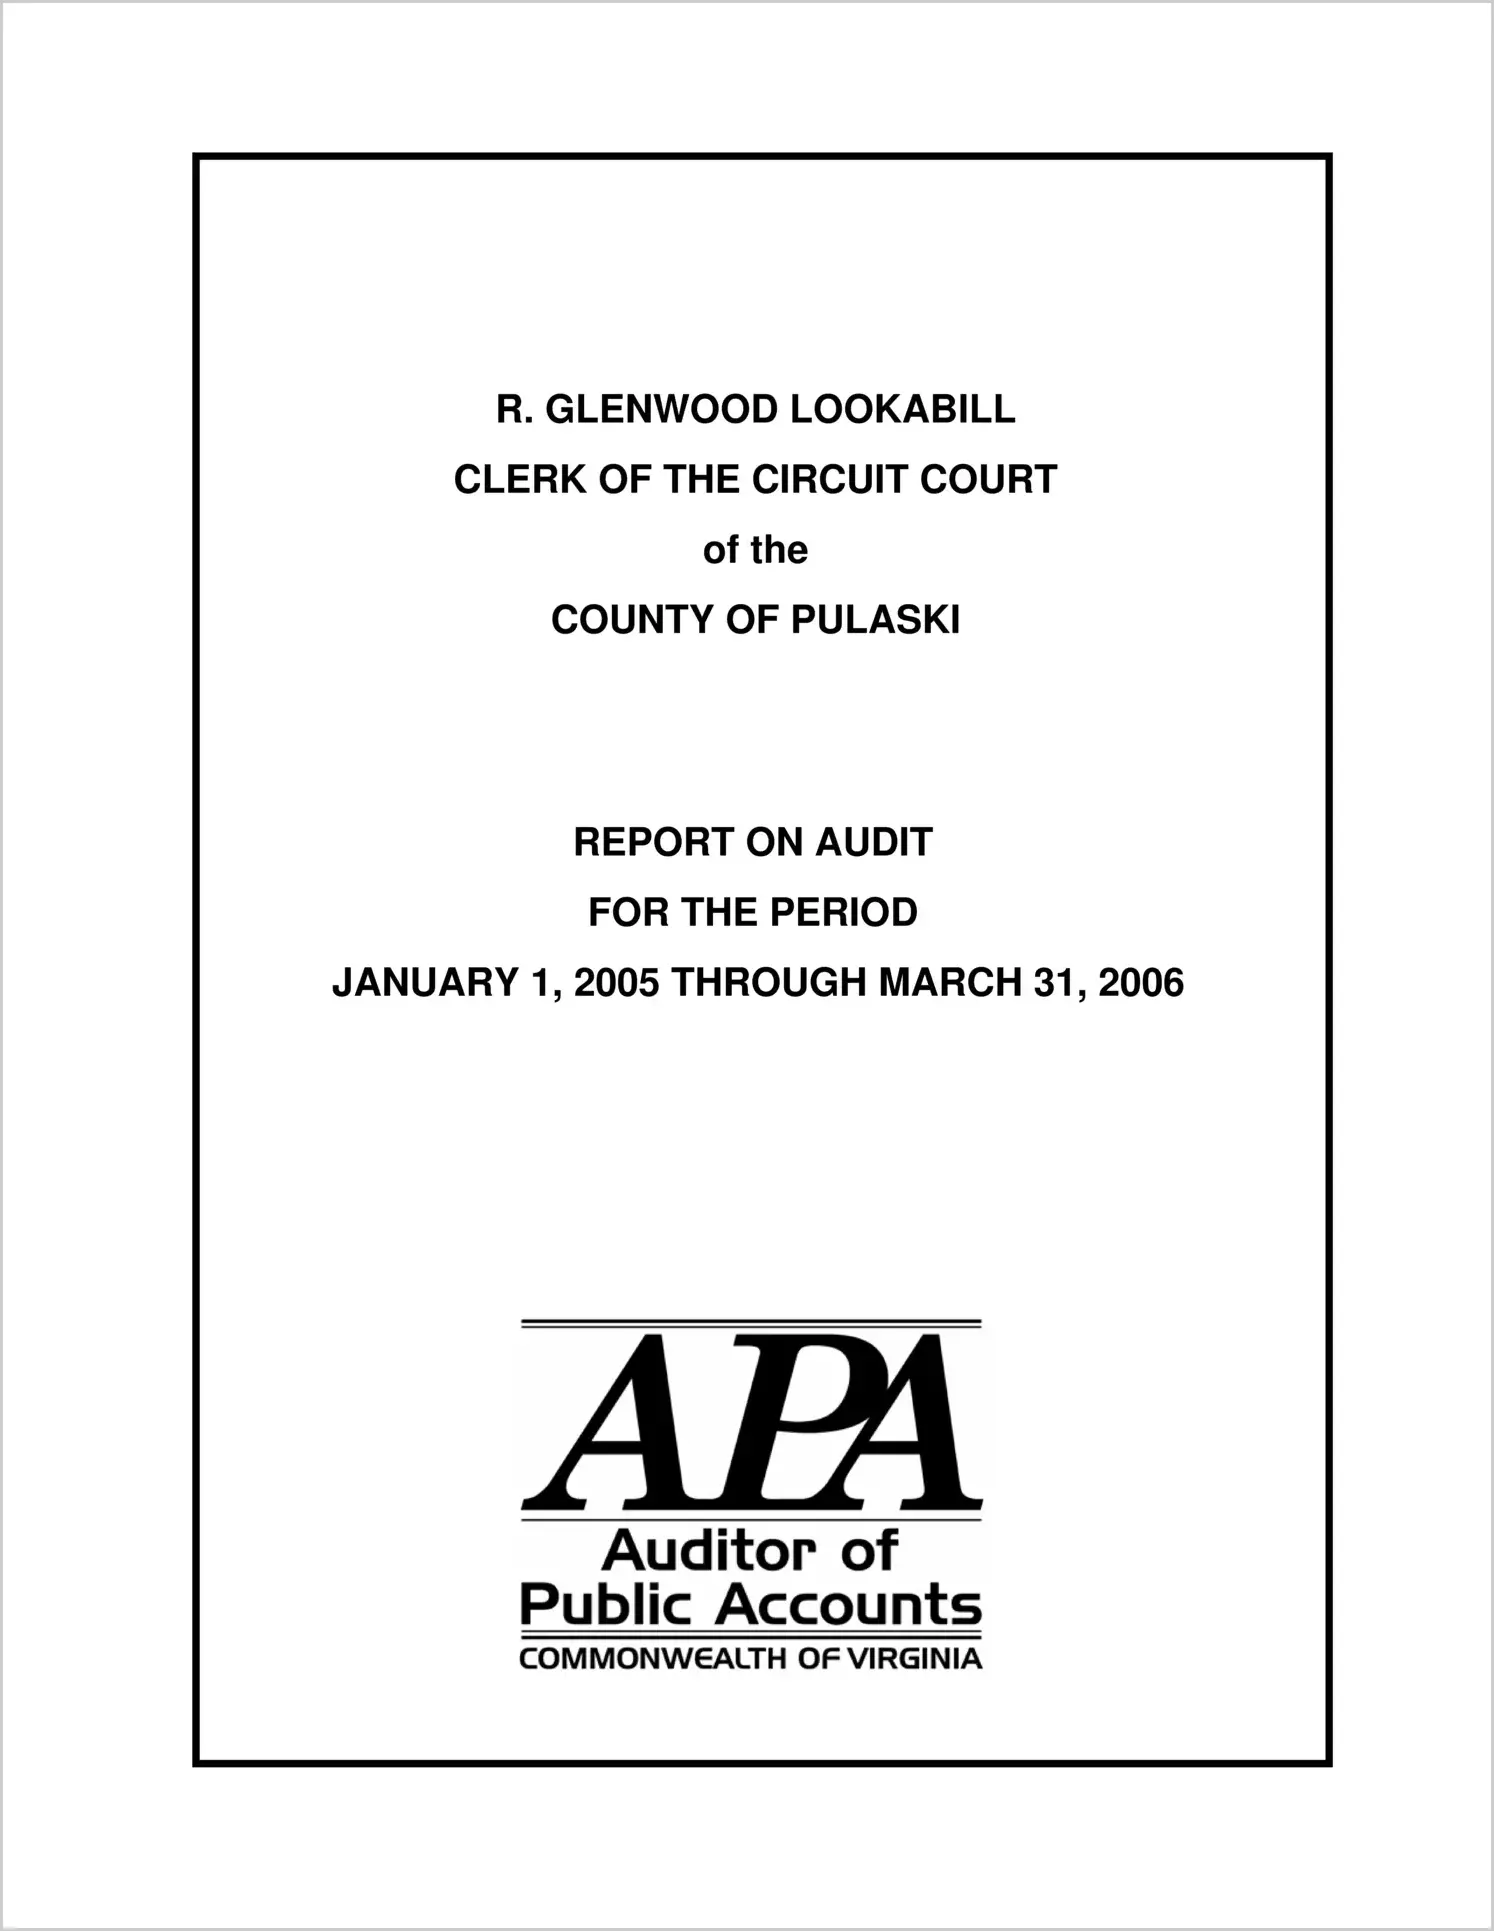 Statement of Assets and Liabilities of R. Glenwood Lookabill, former Clerk of the Circuit Court of the County of Pulaski for the period January 1, 2005 through March 31, 2006